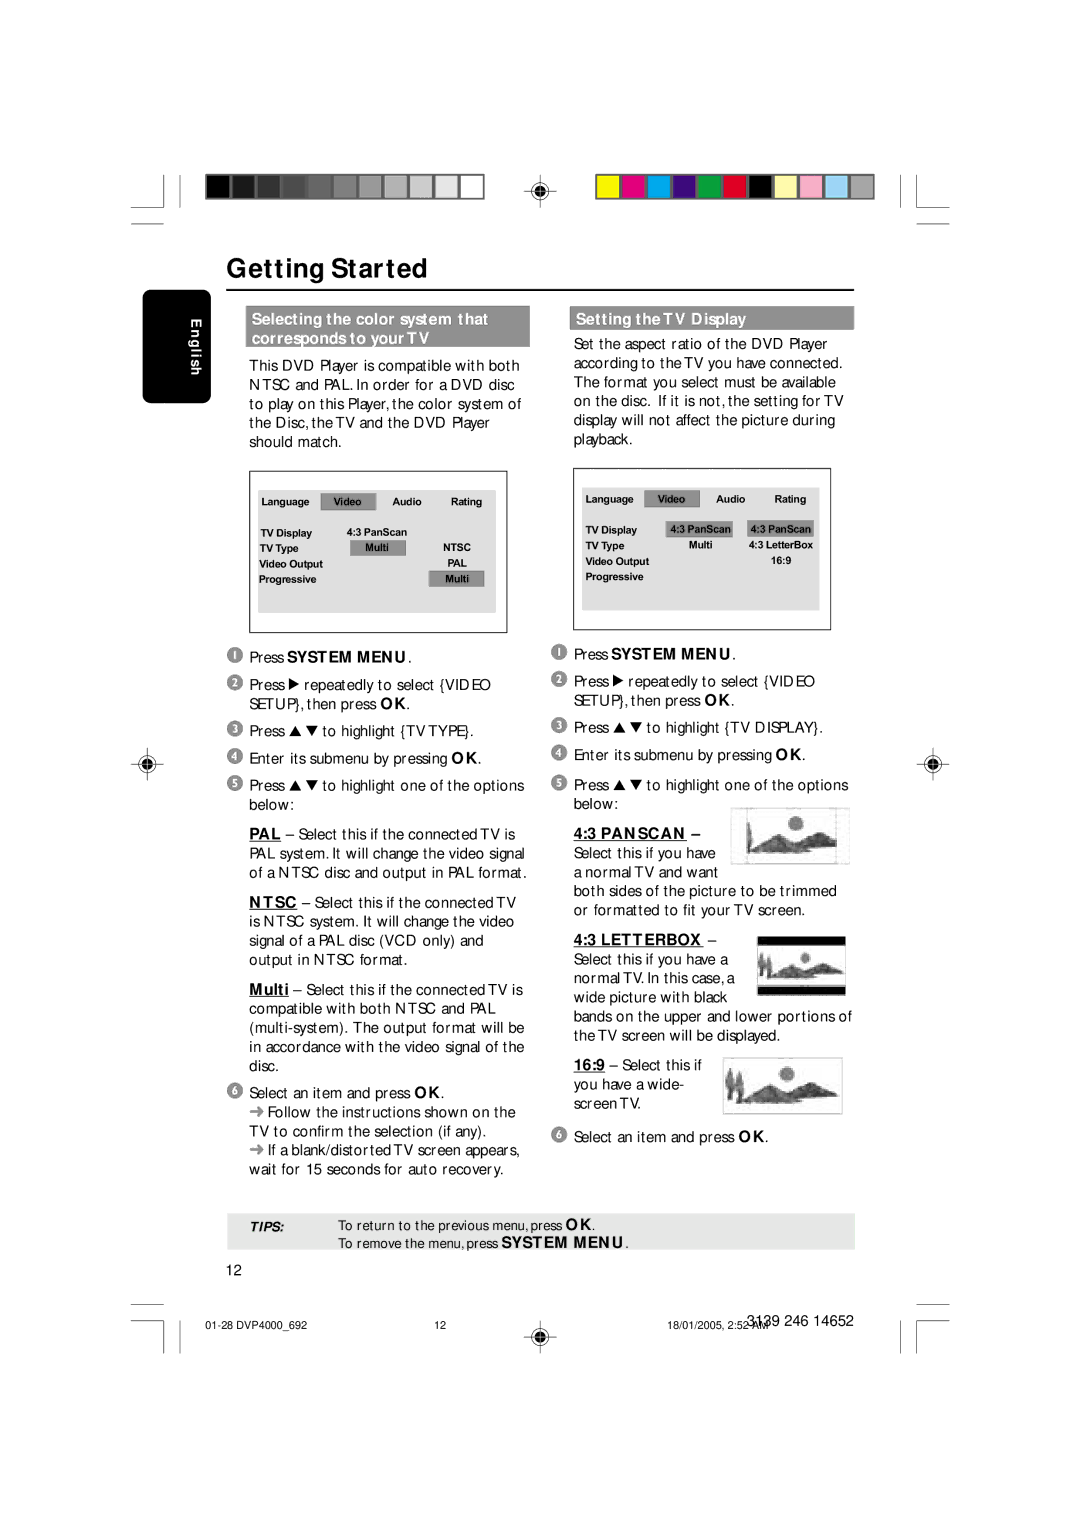 Philips 4000 user manual Selecting the color system that corresponds to your TV, Setting the TV Display, Press System Menu 